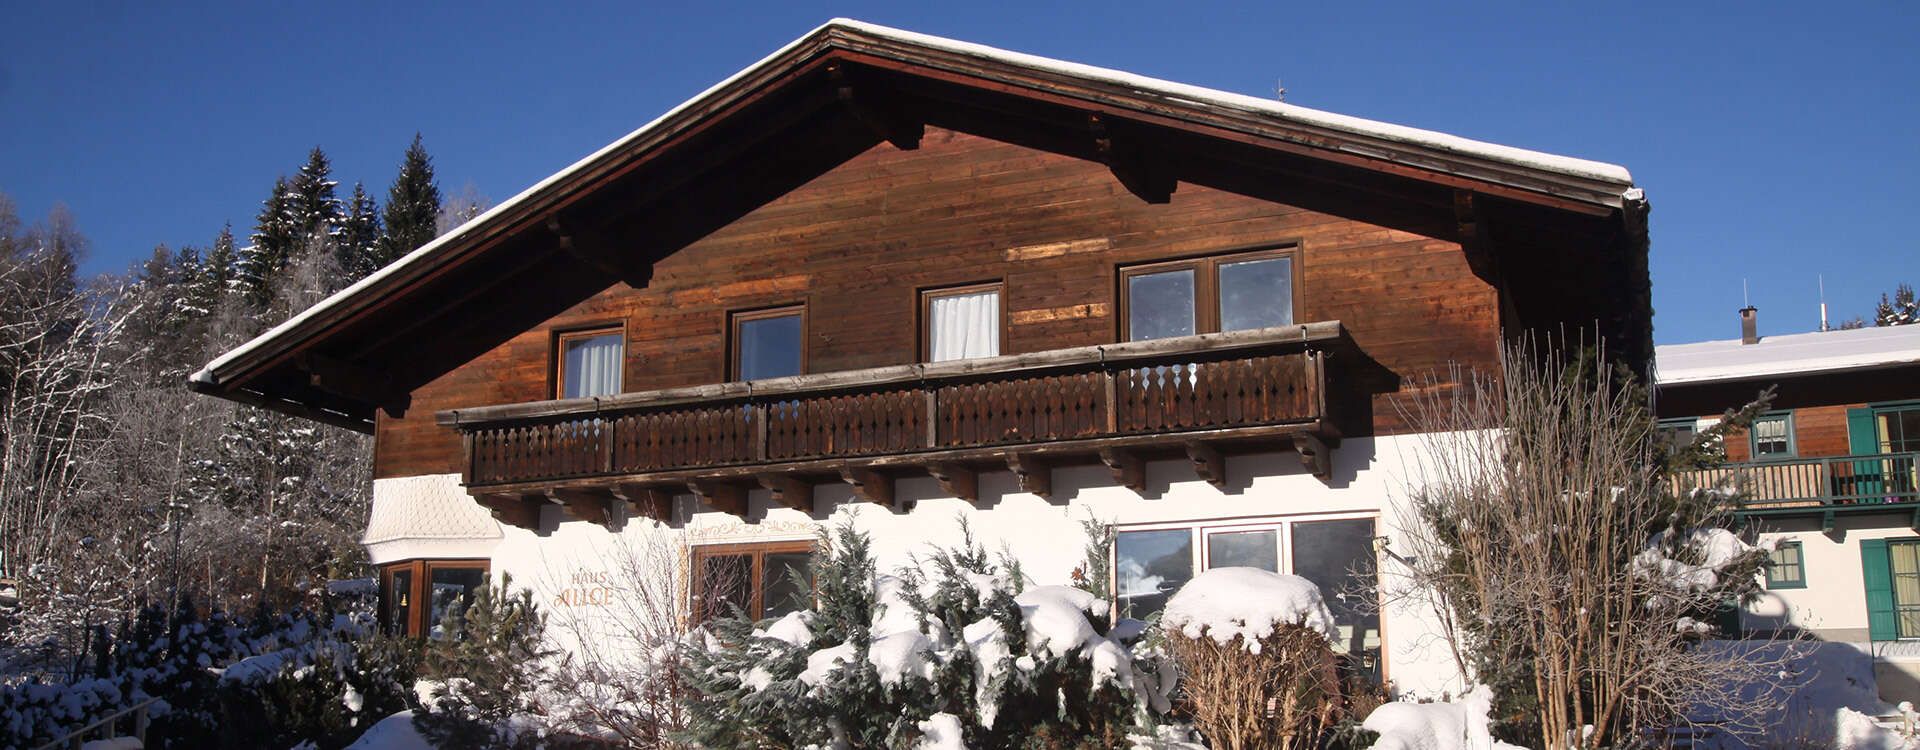 House Alice in Seefeld in Tyrol - view of the house in winter